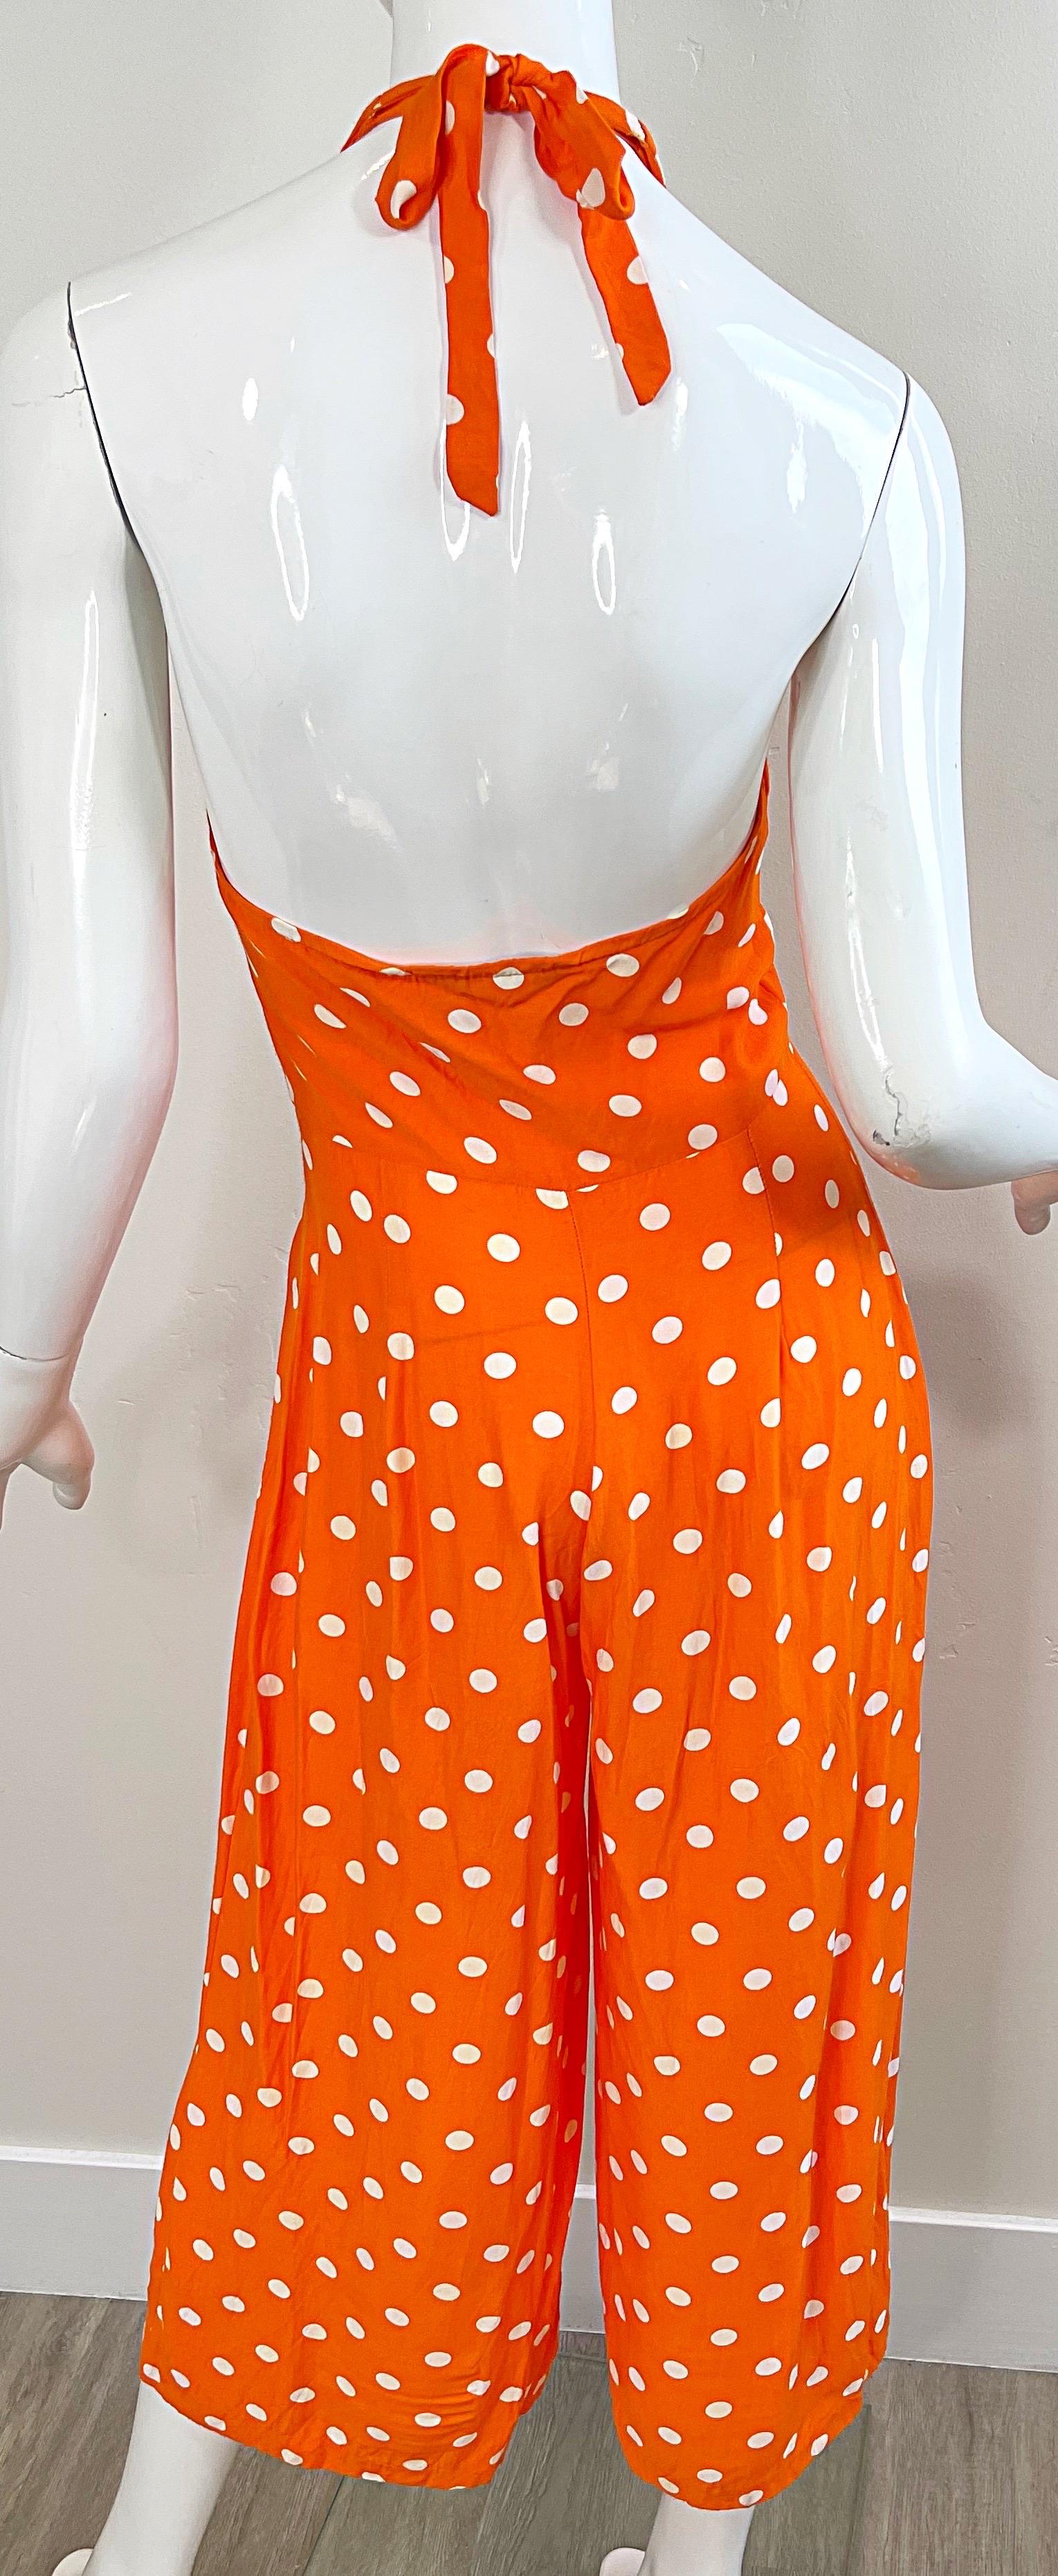 1990s Bright Orange + White Polka Dot Vintage 90s Halter Rayon Culottes Jumpsuit In Excellent Condition For Sale In San Diego, CA